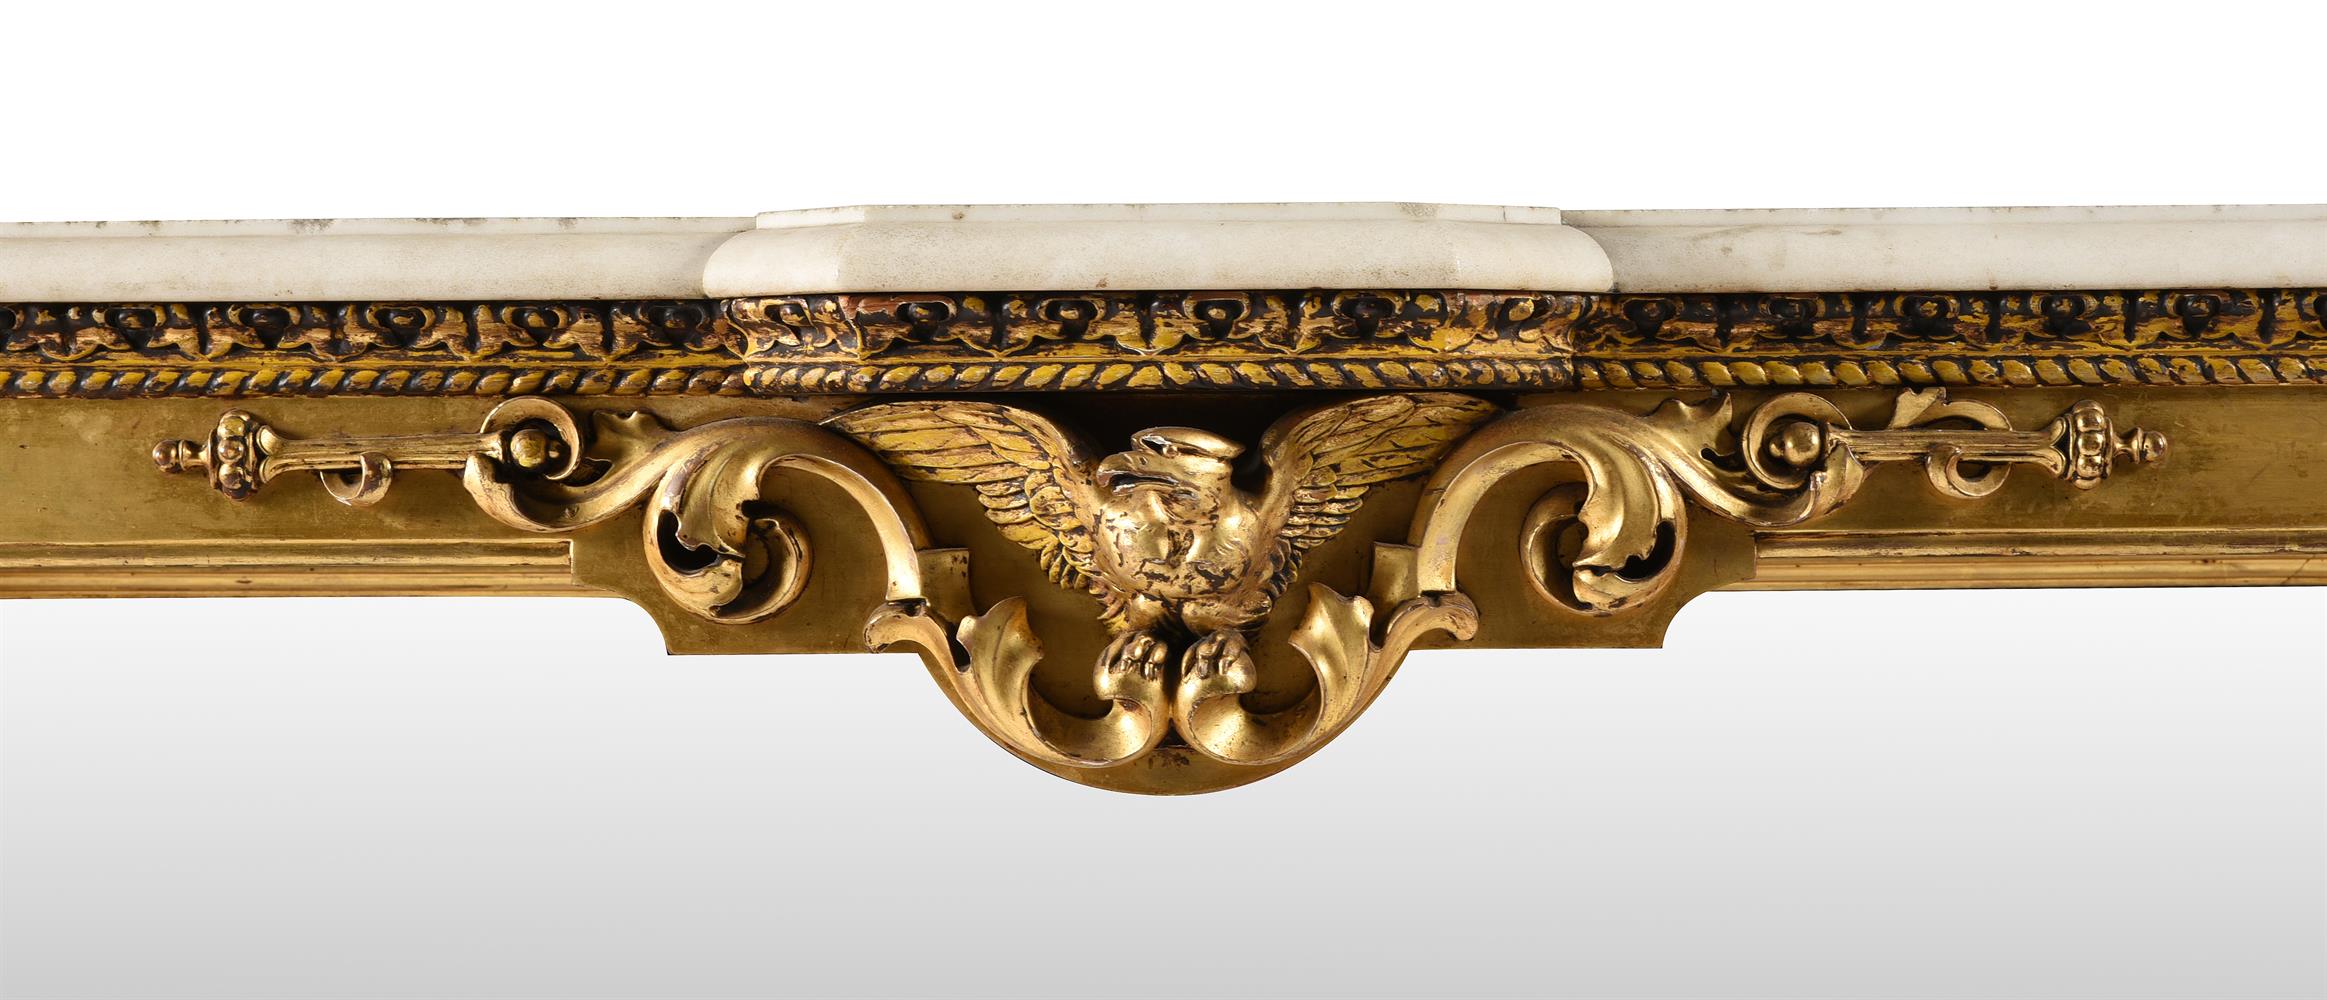 A VICTORIAN GILTWOOD AND AMBOYNA CONSOLE TABLELATE 19TH CENTURY - Image 3 of 3